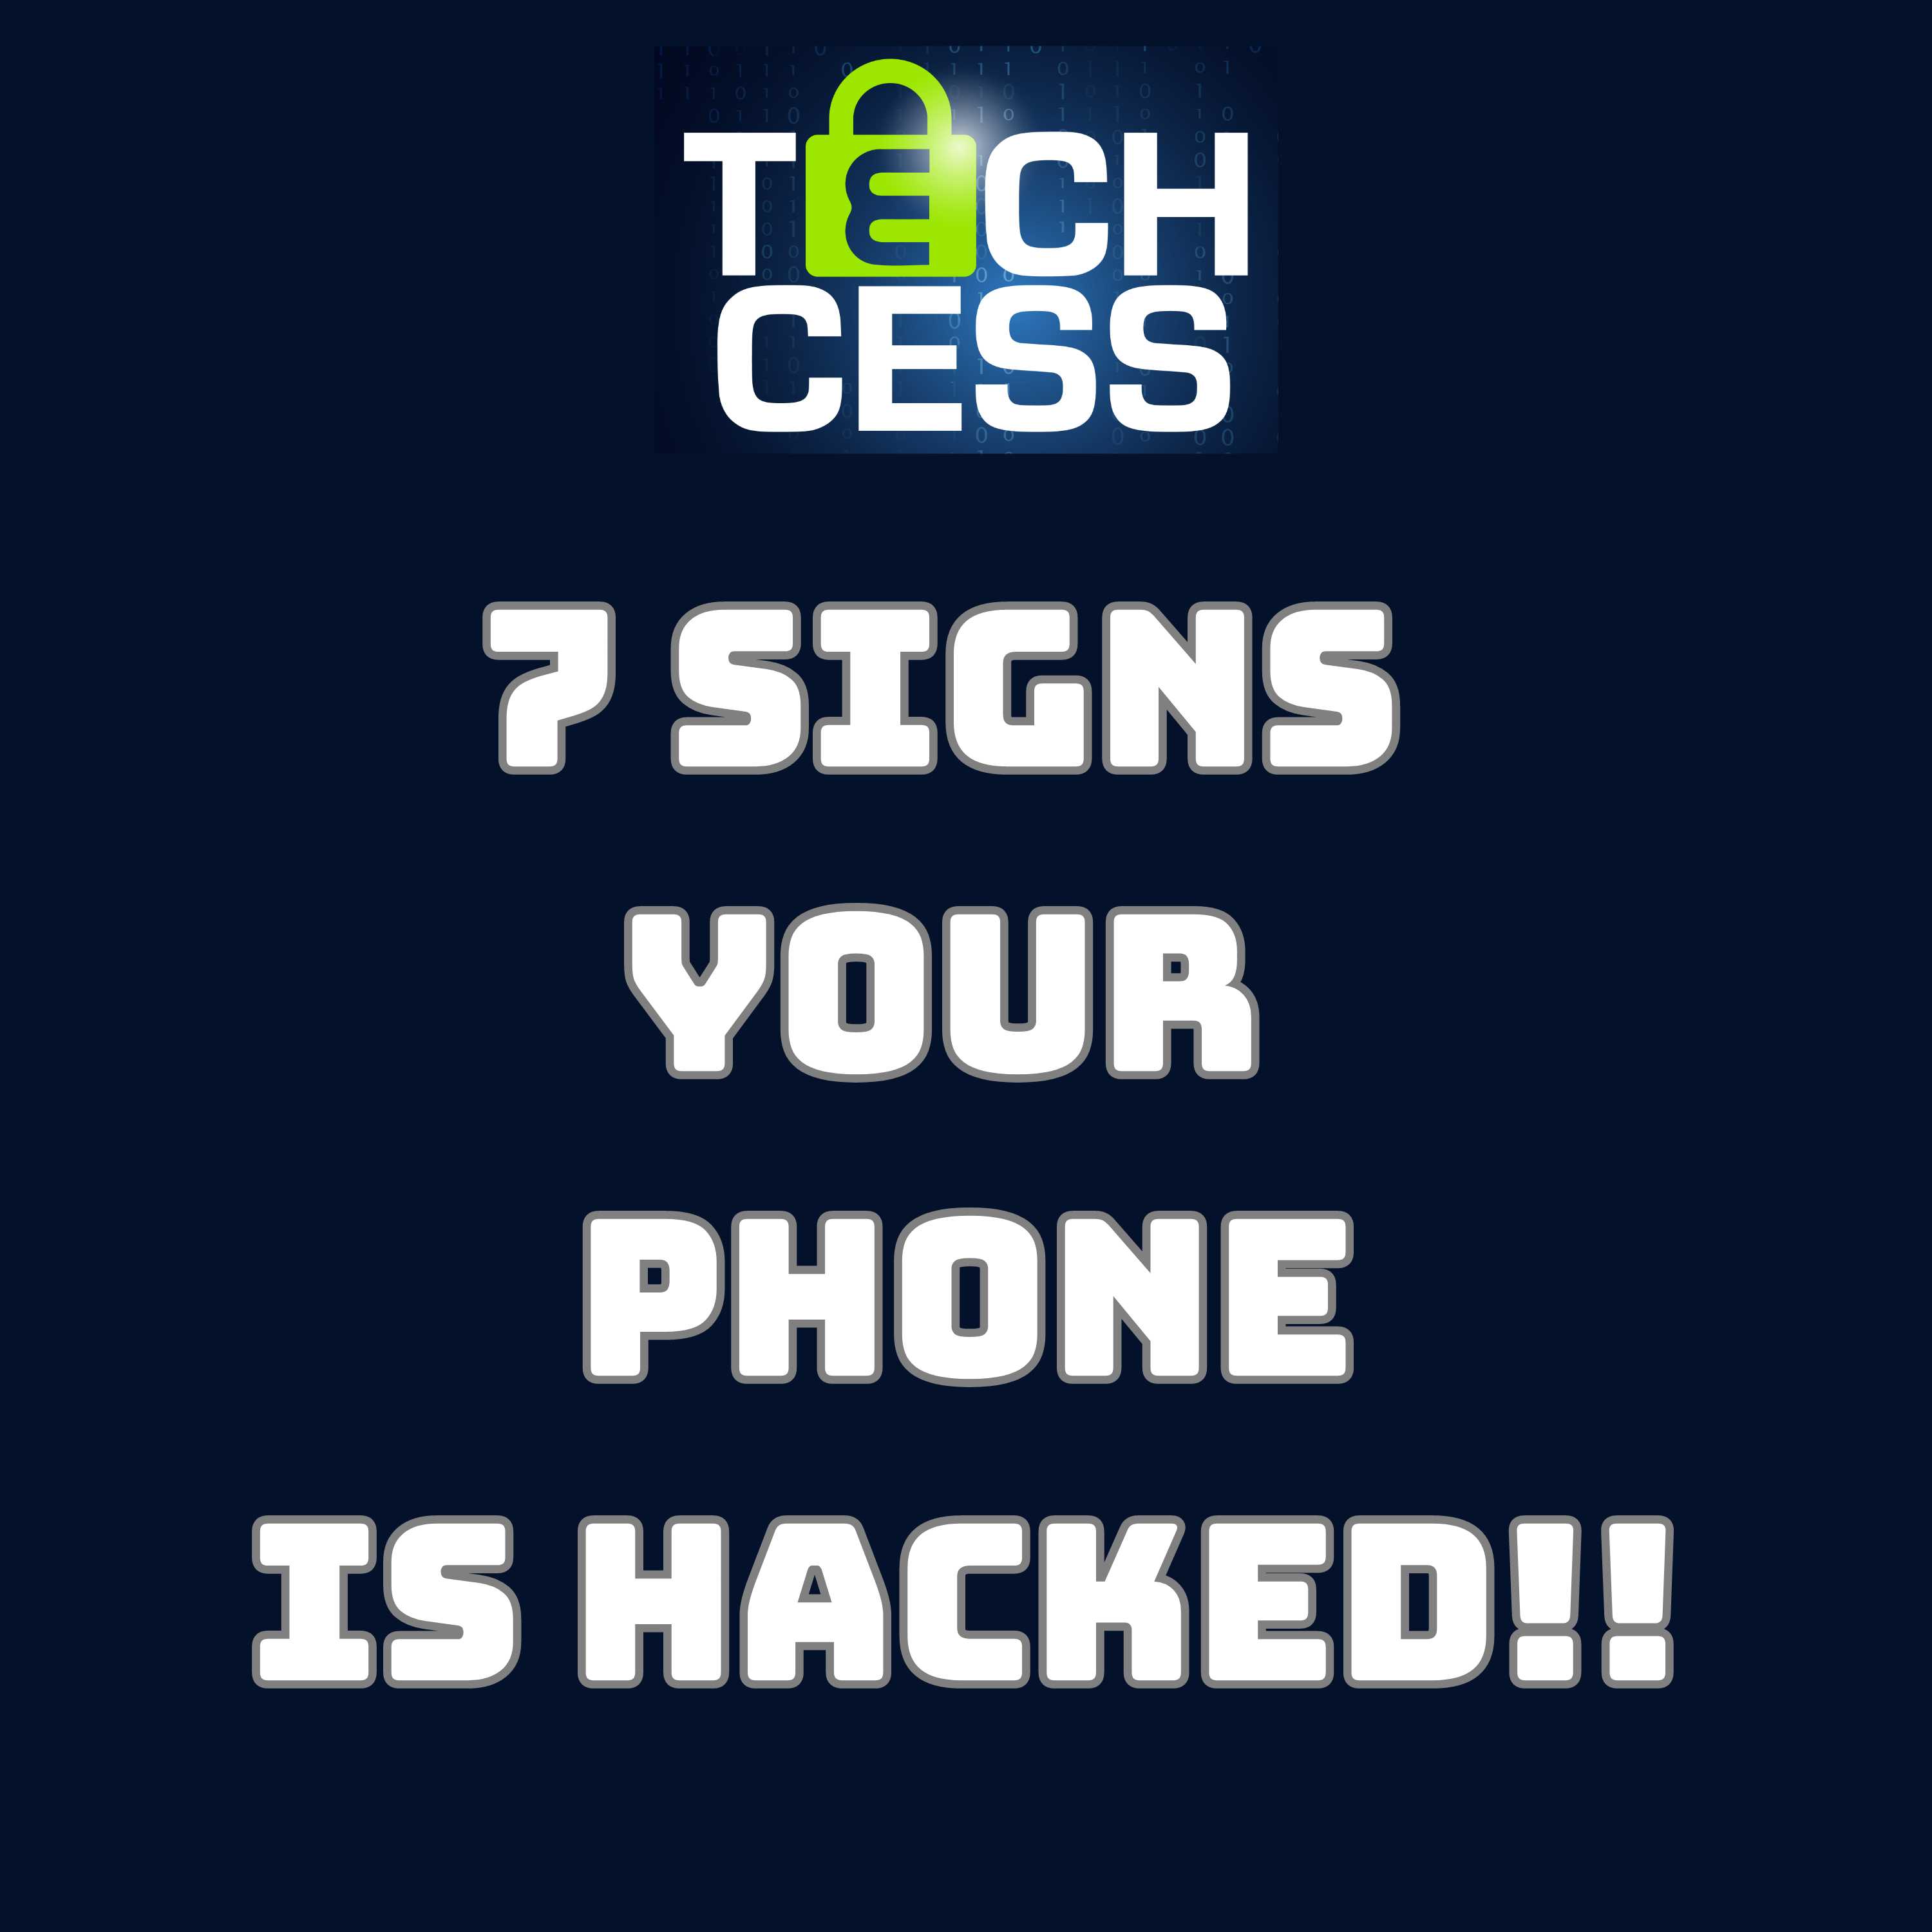 7 signs your phone's been hacked (and how to fix it)